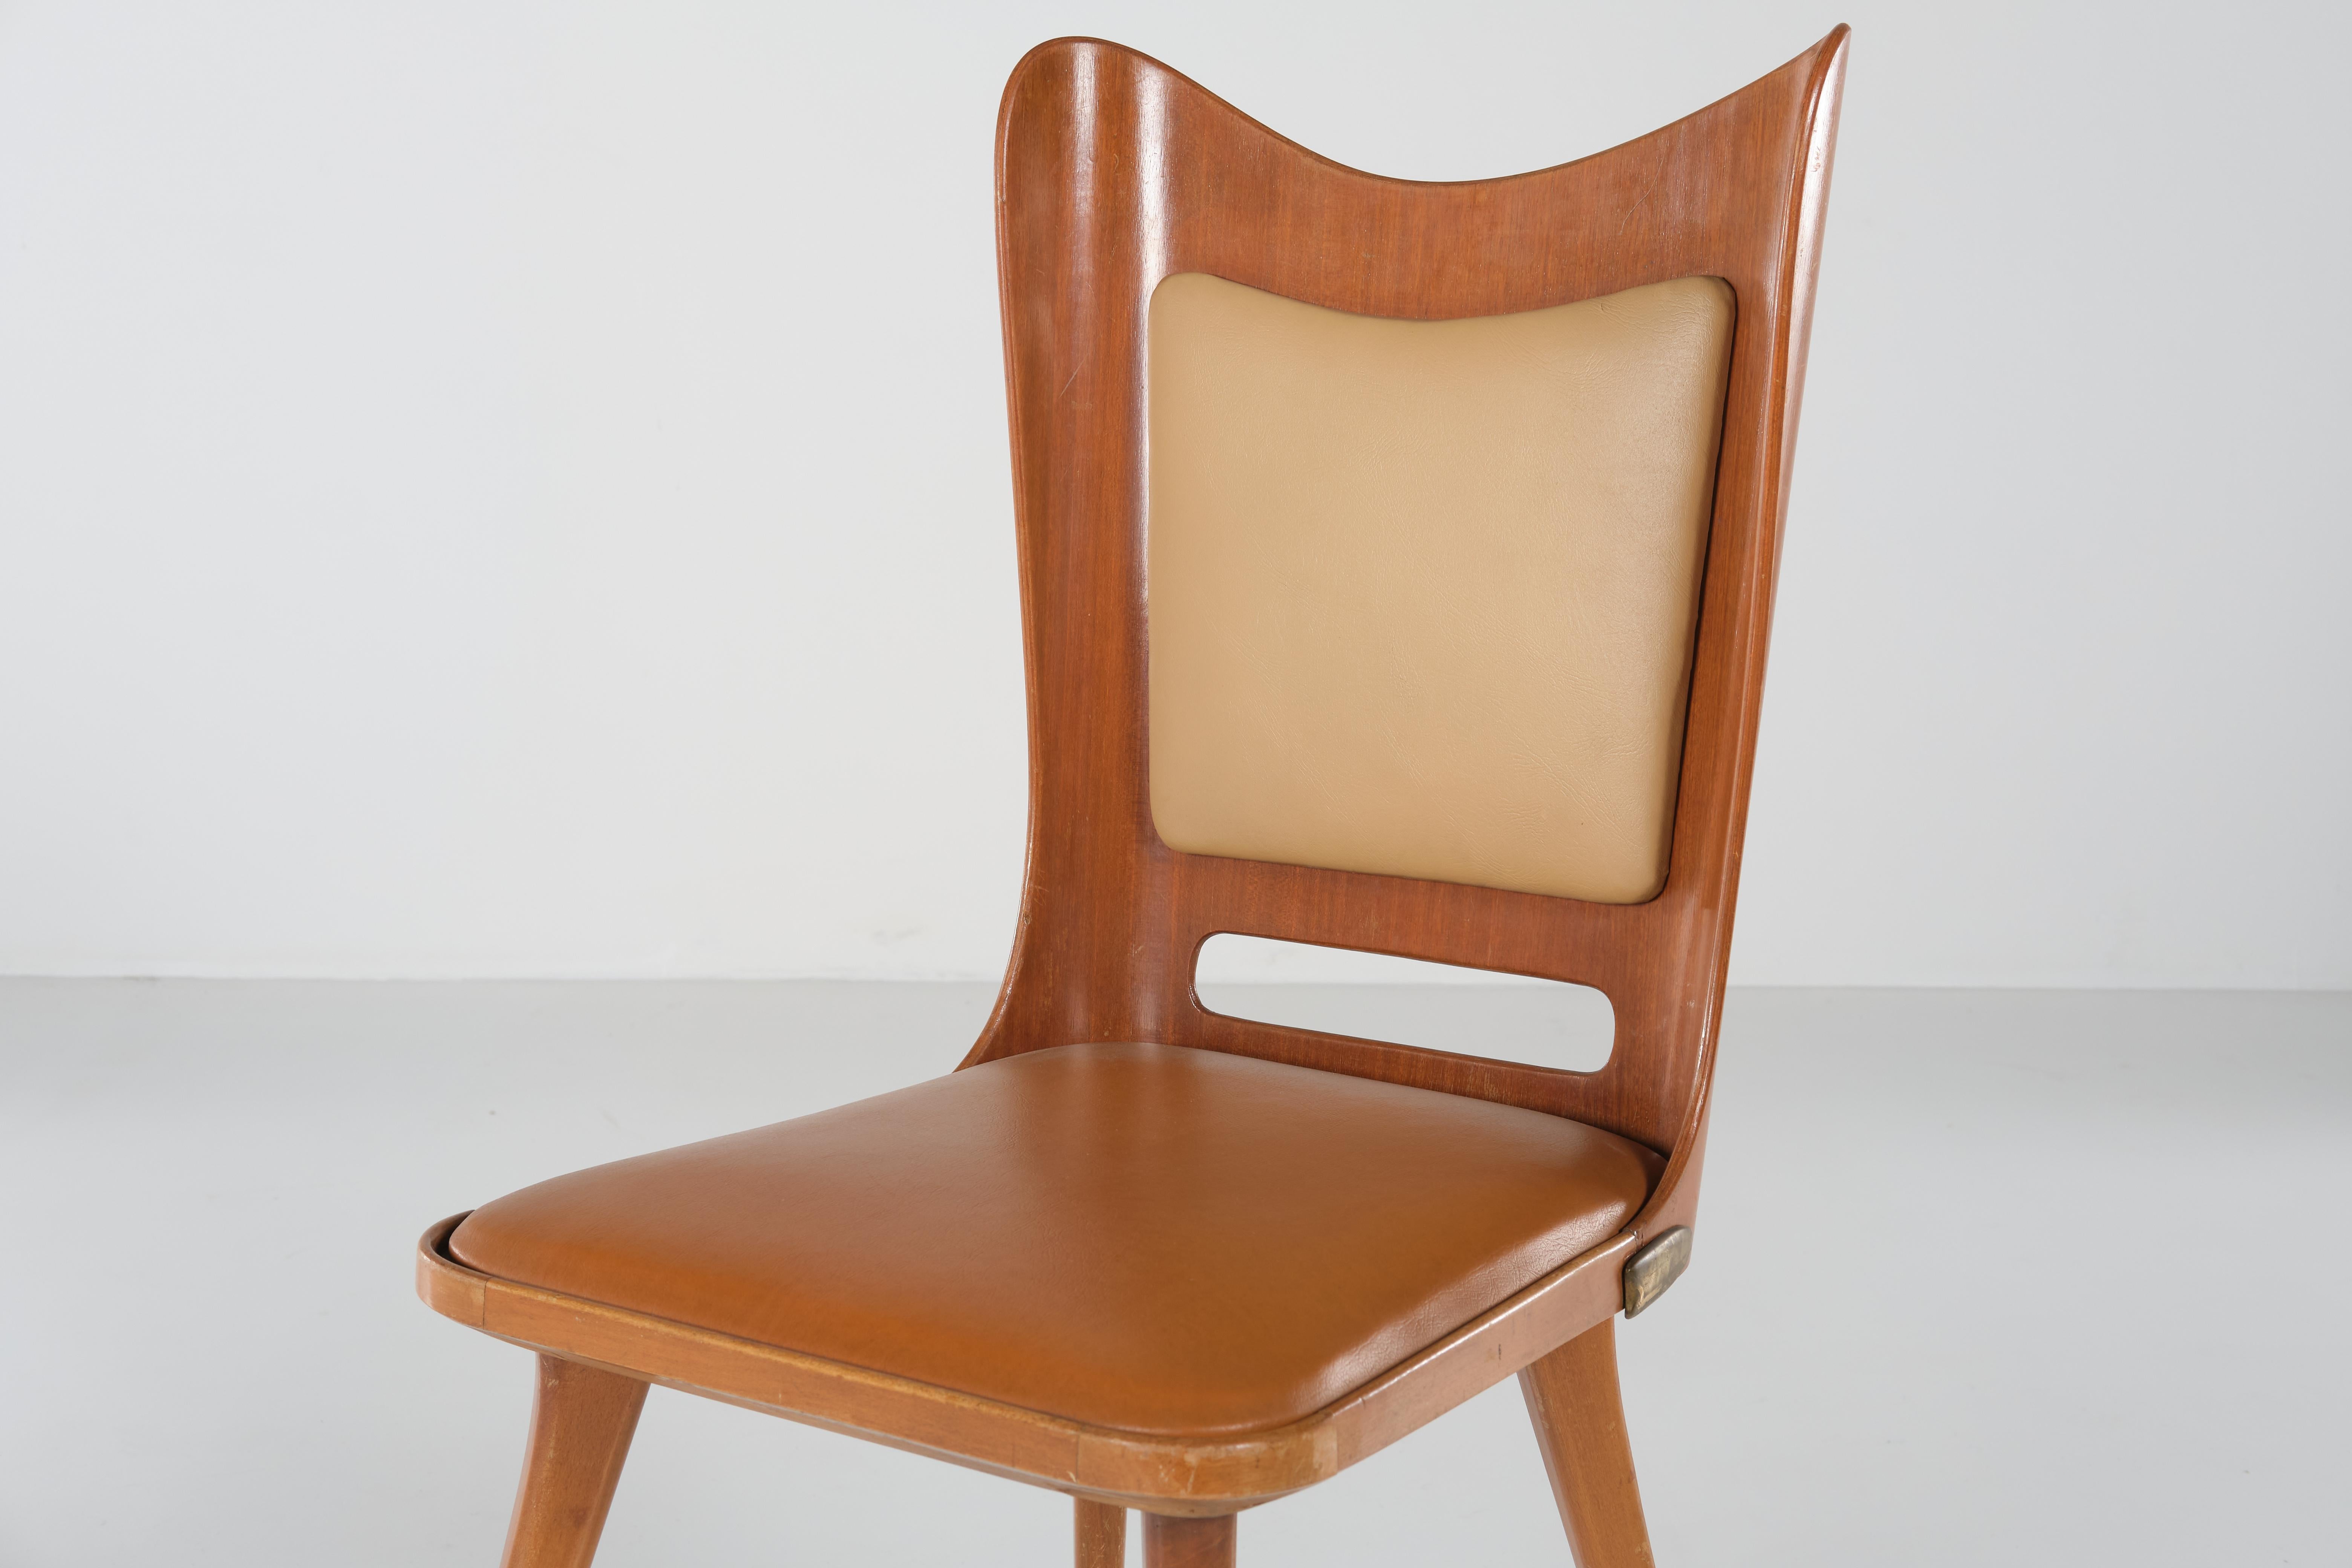 Carlo Ratti Set of 6 Chairs Wood Plywood and Faux Leather, Italian Design 1950s In Fair Condition For Sale In Milan, IT